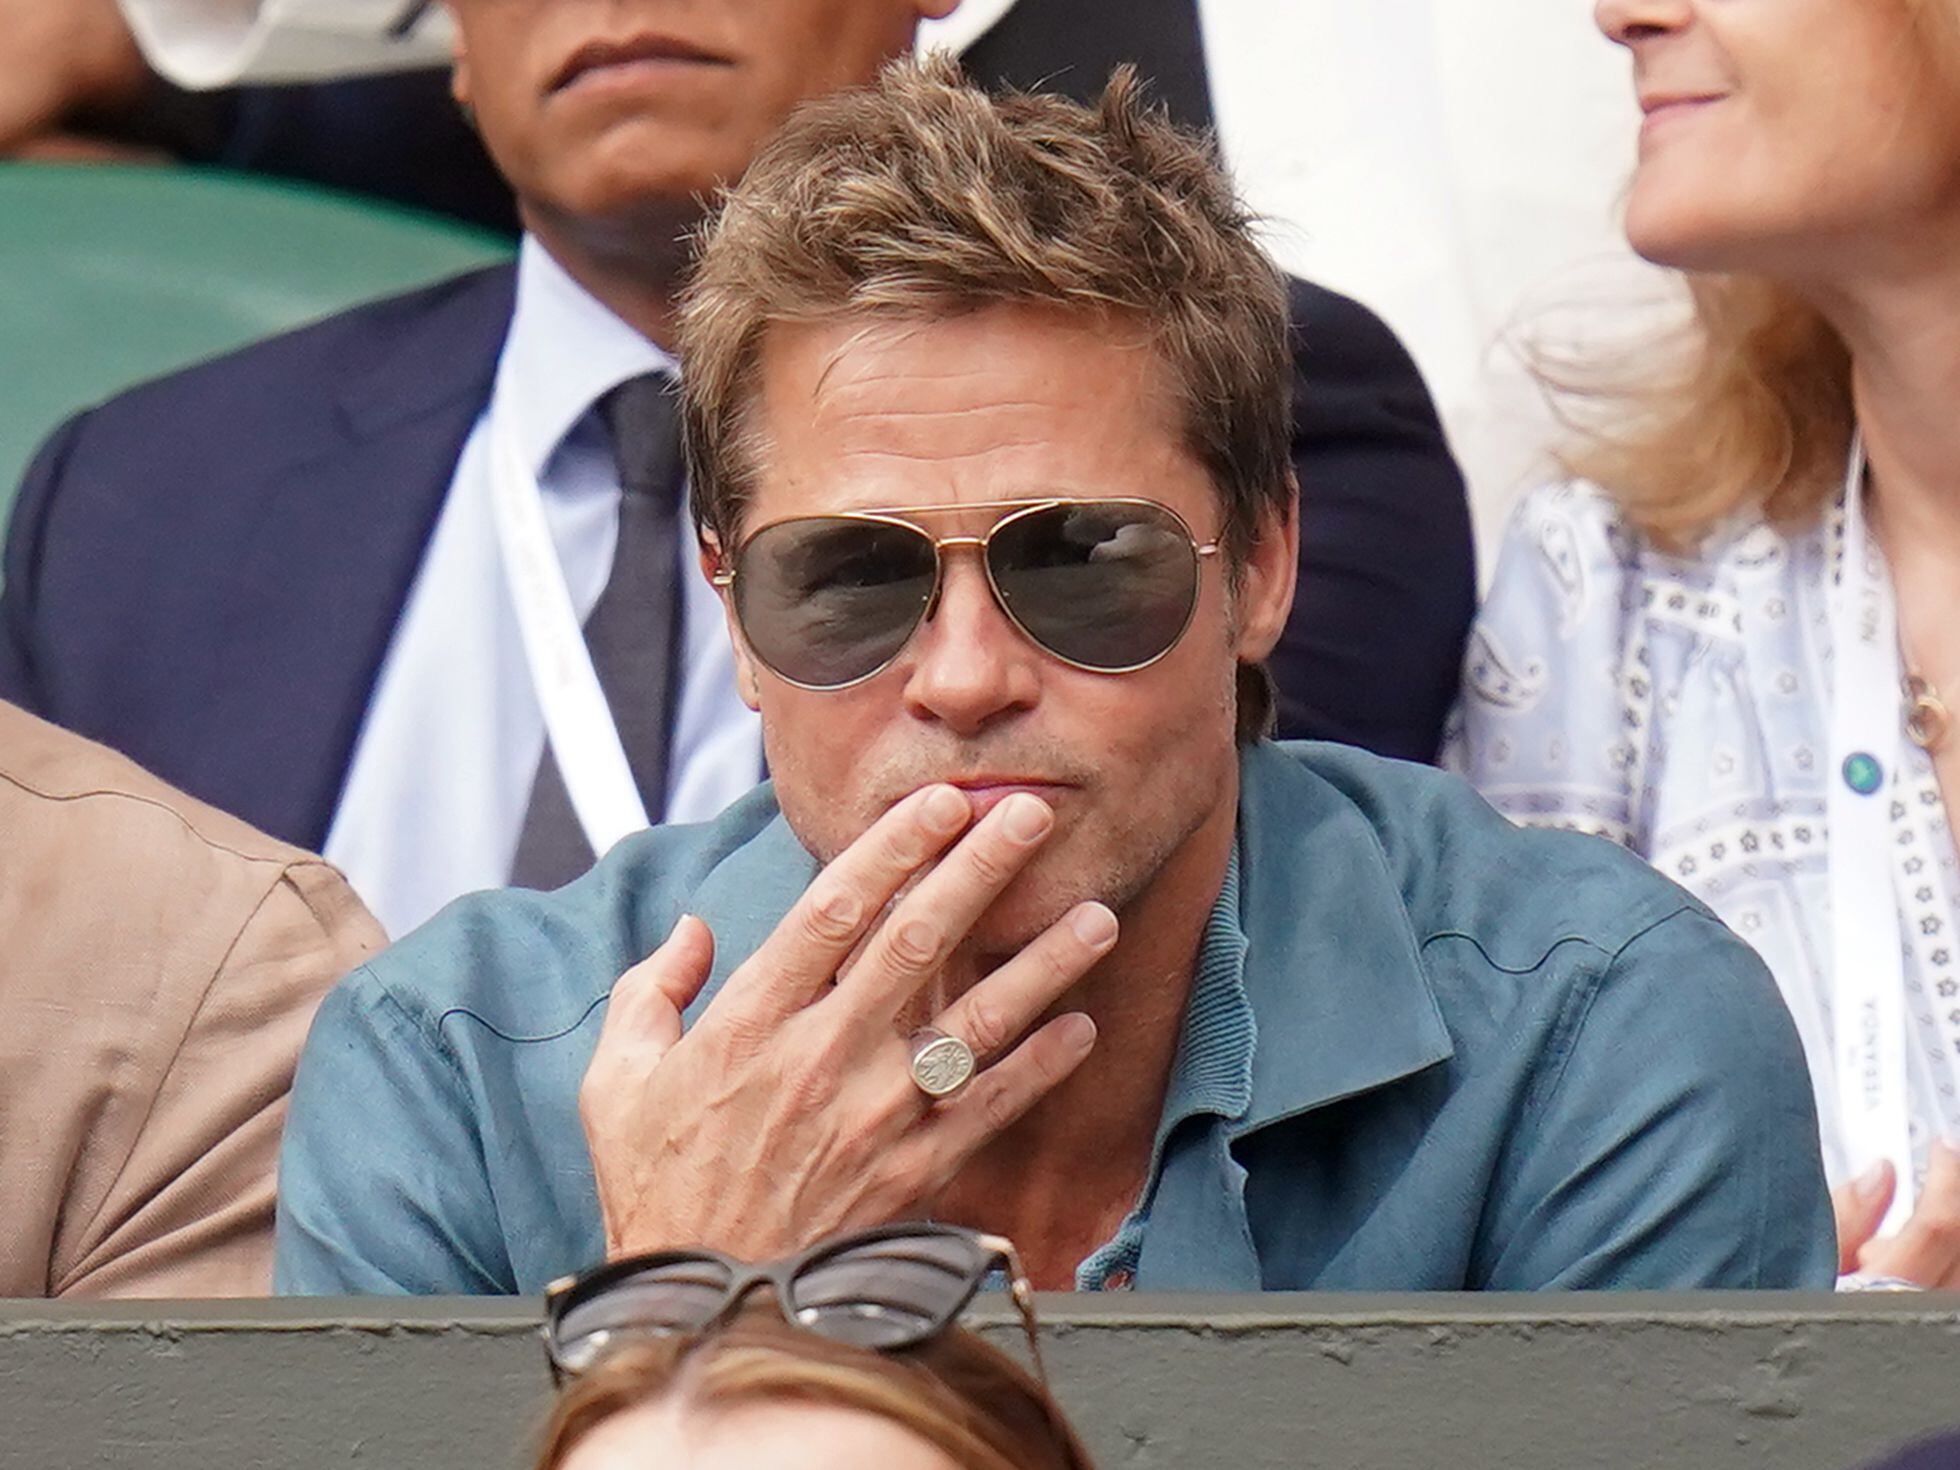 Brad Pitt, the superstar who hasn't let his personal problems